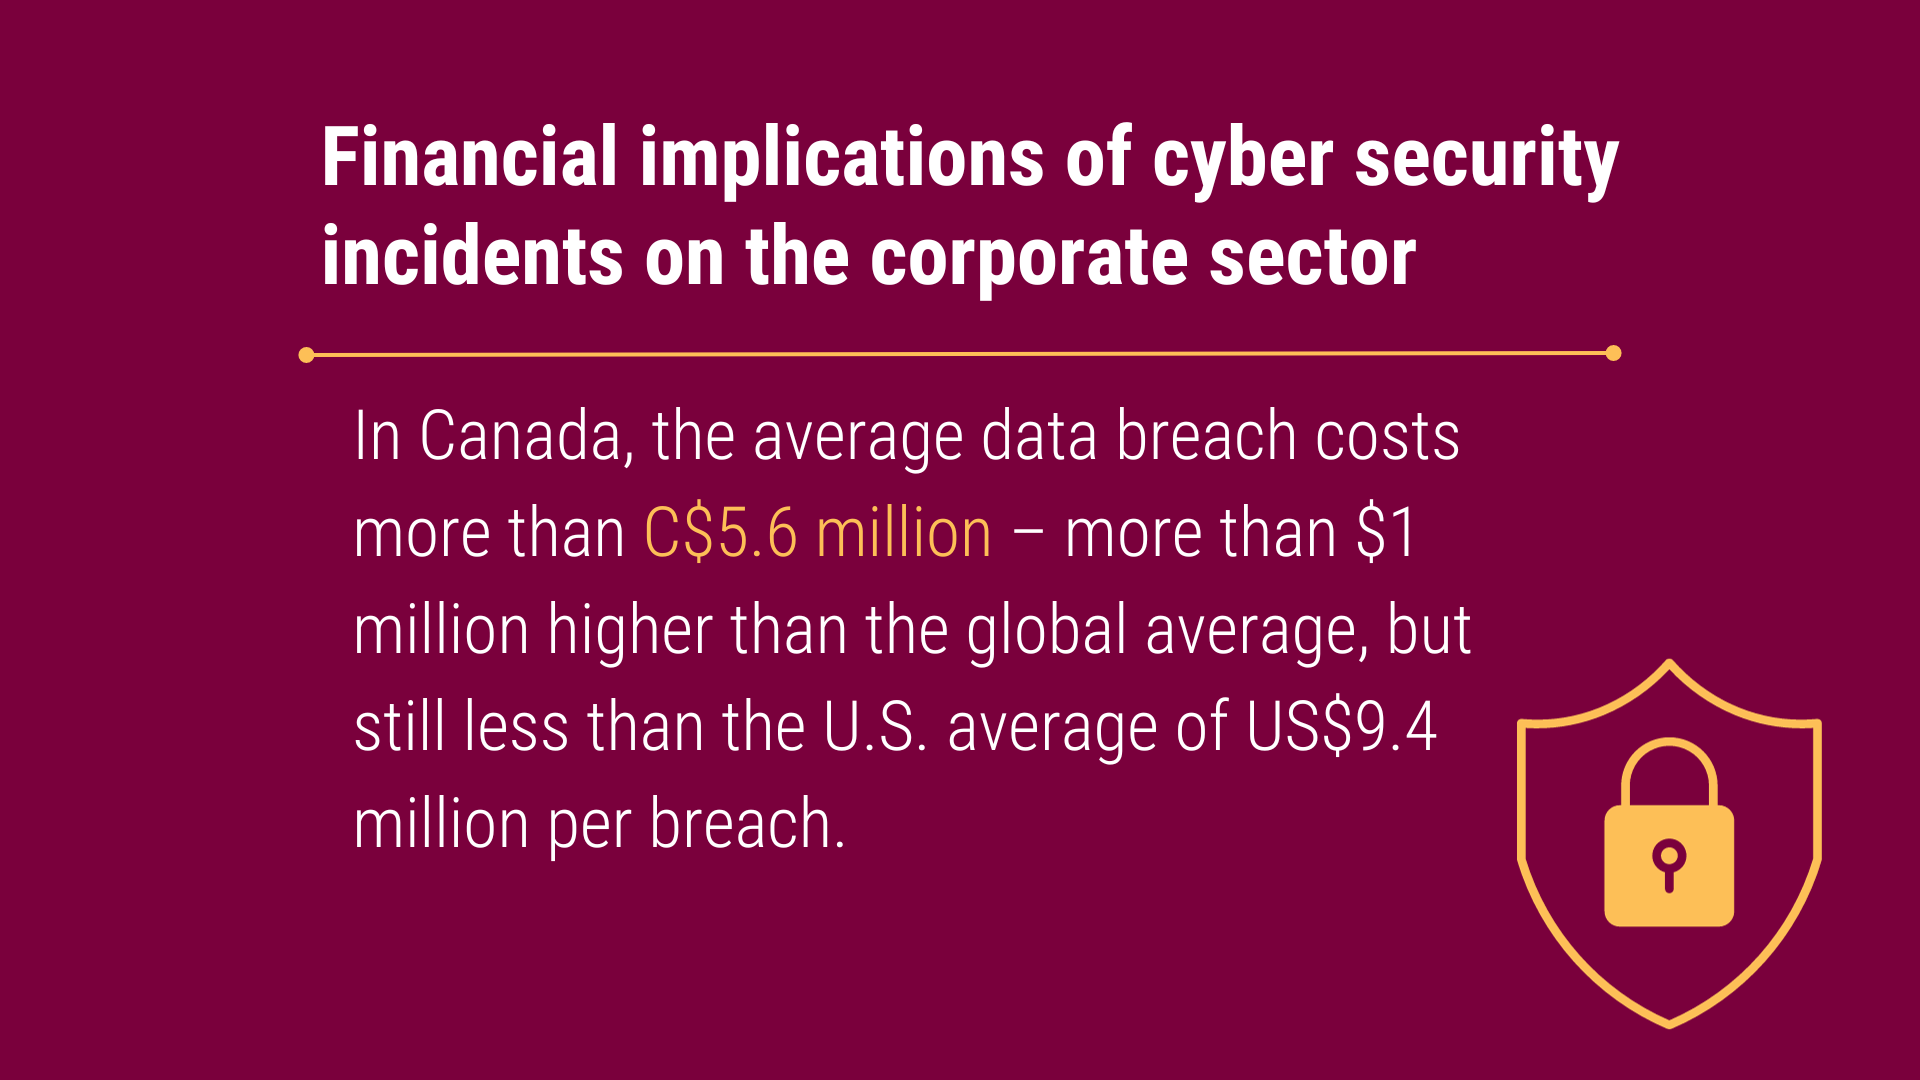 In Canada, the average data breach costs more than C$5.6 million – more than $1 million higher than the global average, but still less than the U.S. average of US$9.4 million per breach.